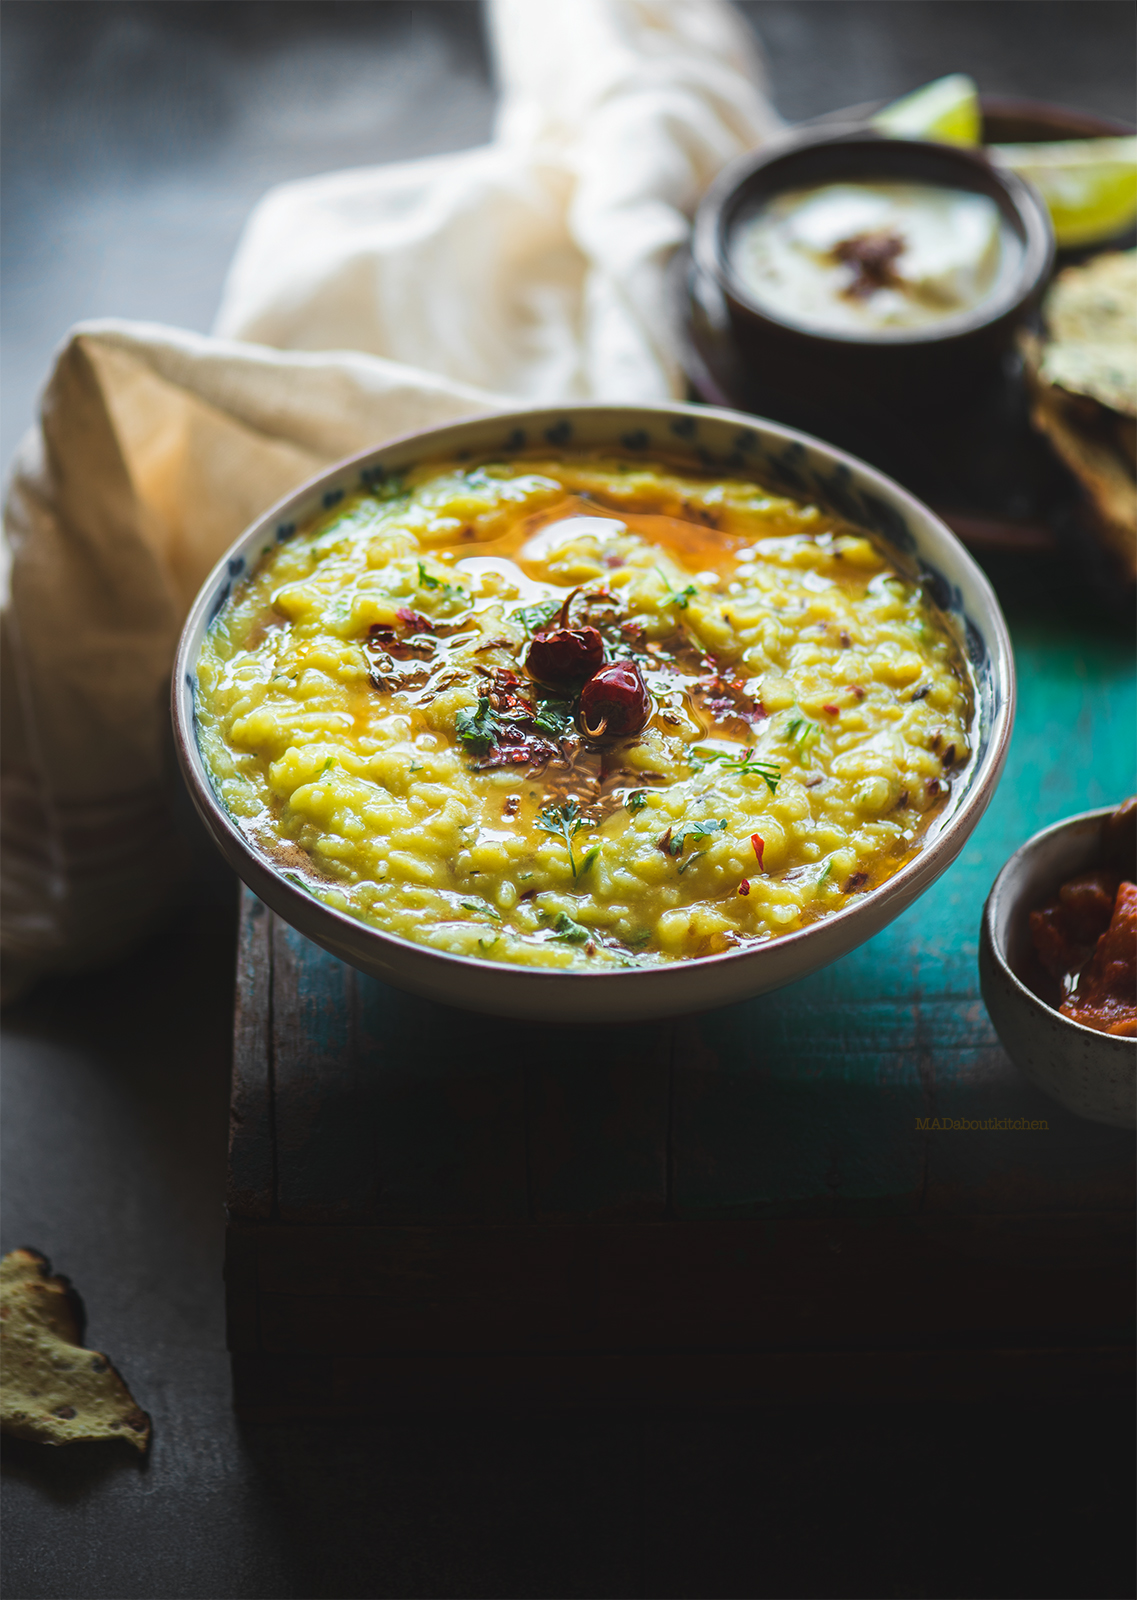 Khichdi, the most common one pot meal in India is a wholesome dish made using rice and lentils. Khichdi is the comfort food that is easy and healthy.